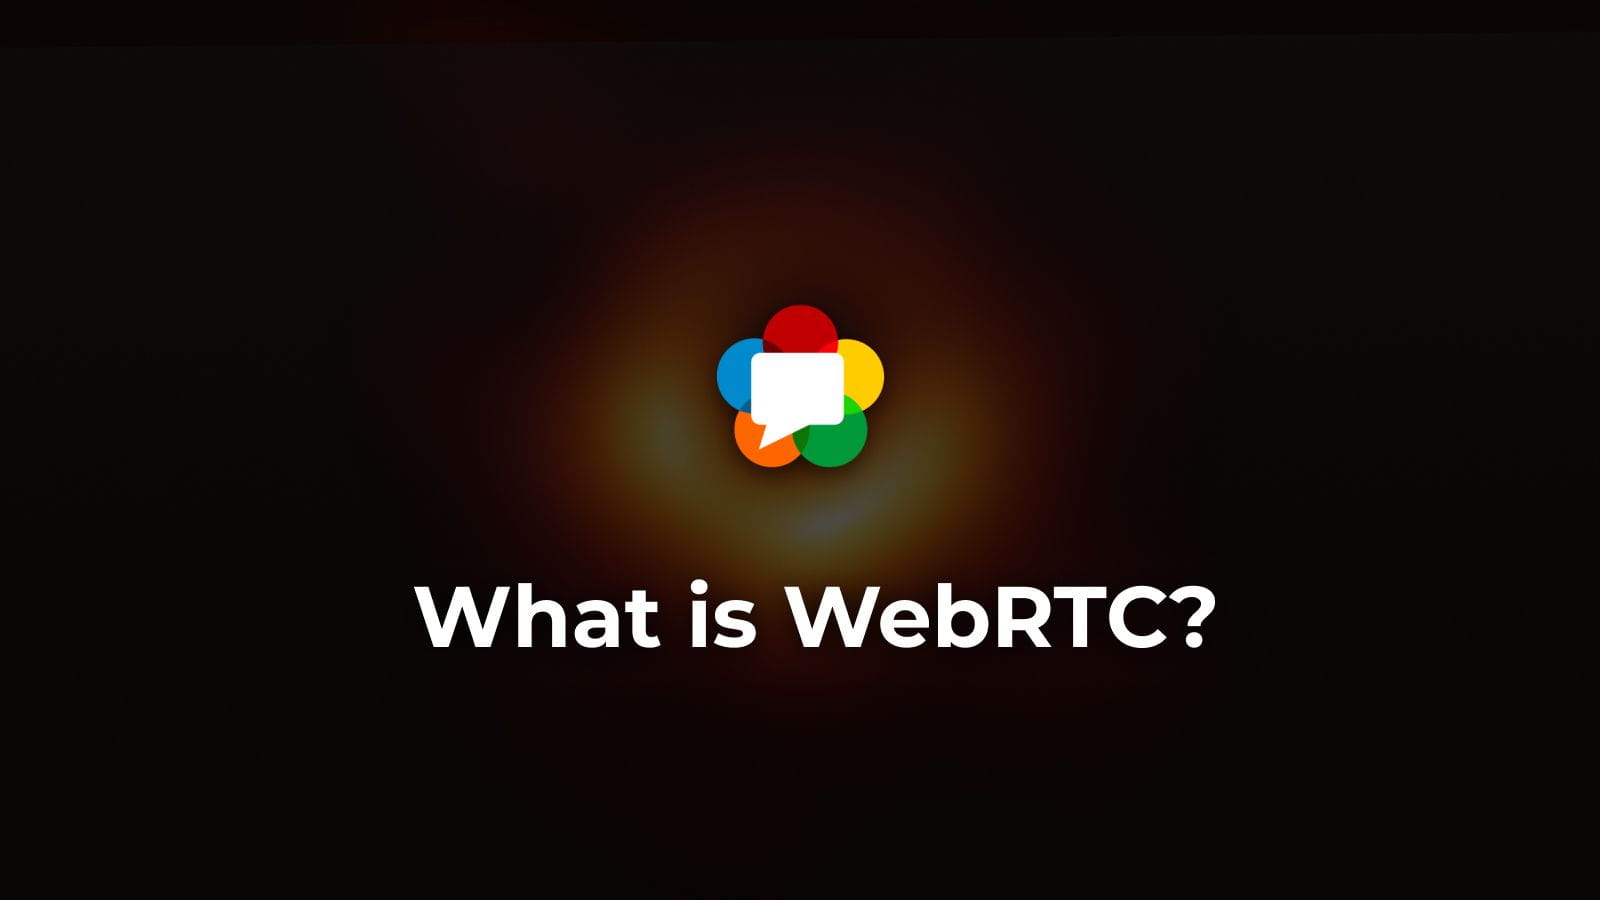 What is WebRTC? and How does WebRTC work?